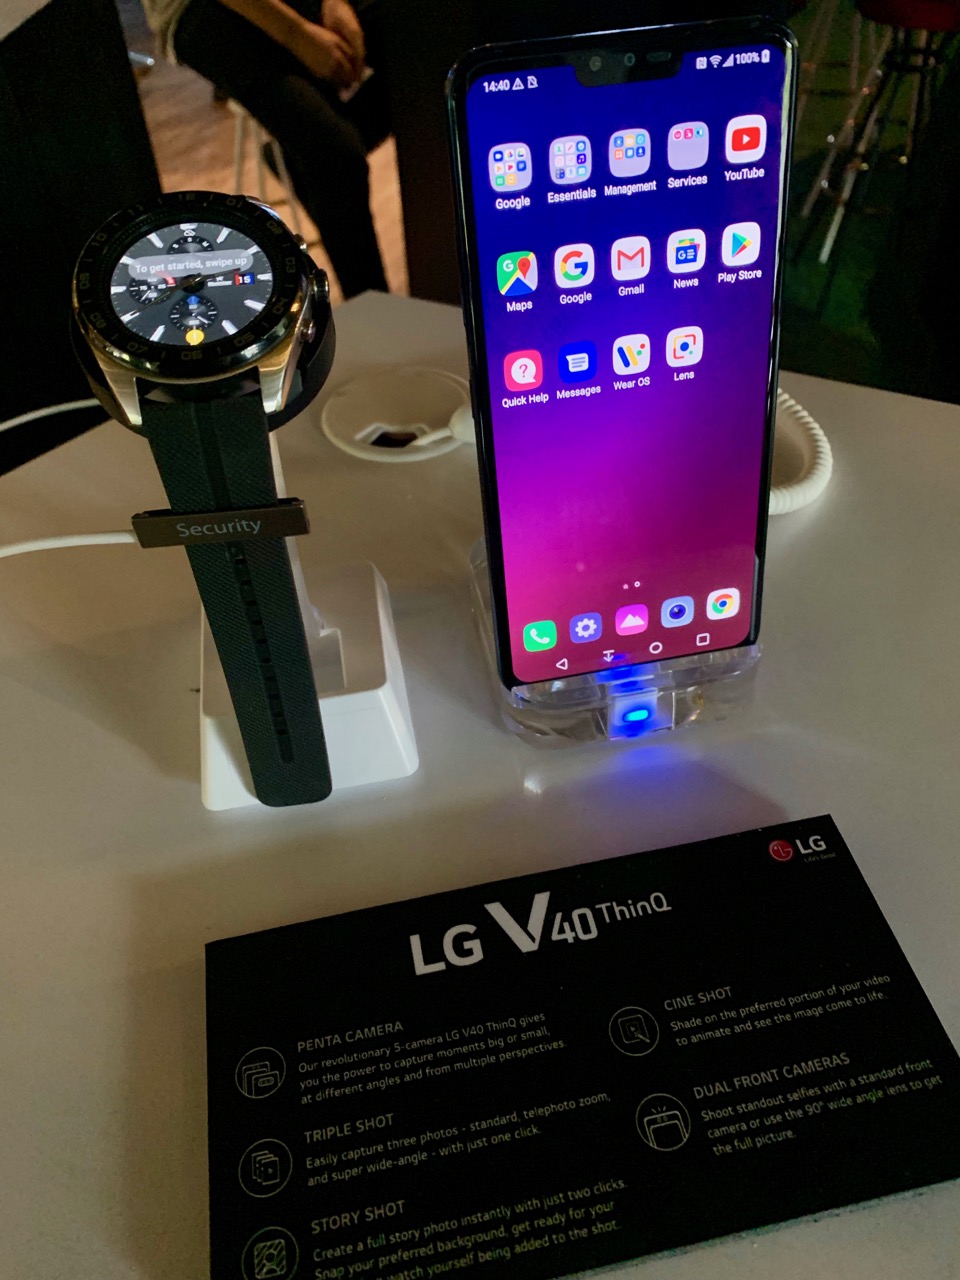 Buy LG V40 ThinQ and Stand a Chance to Win a Trip for 2 To Korea!